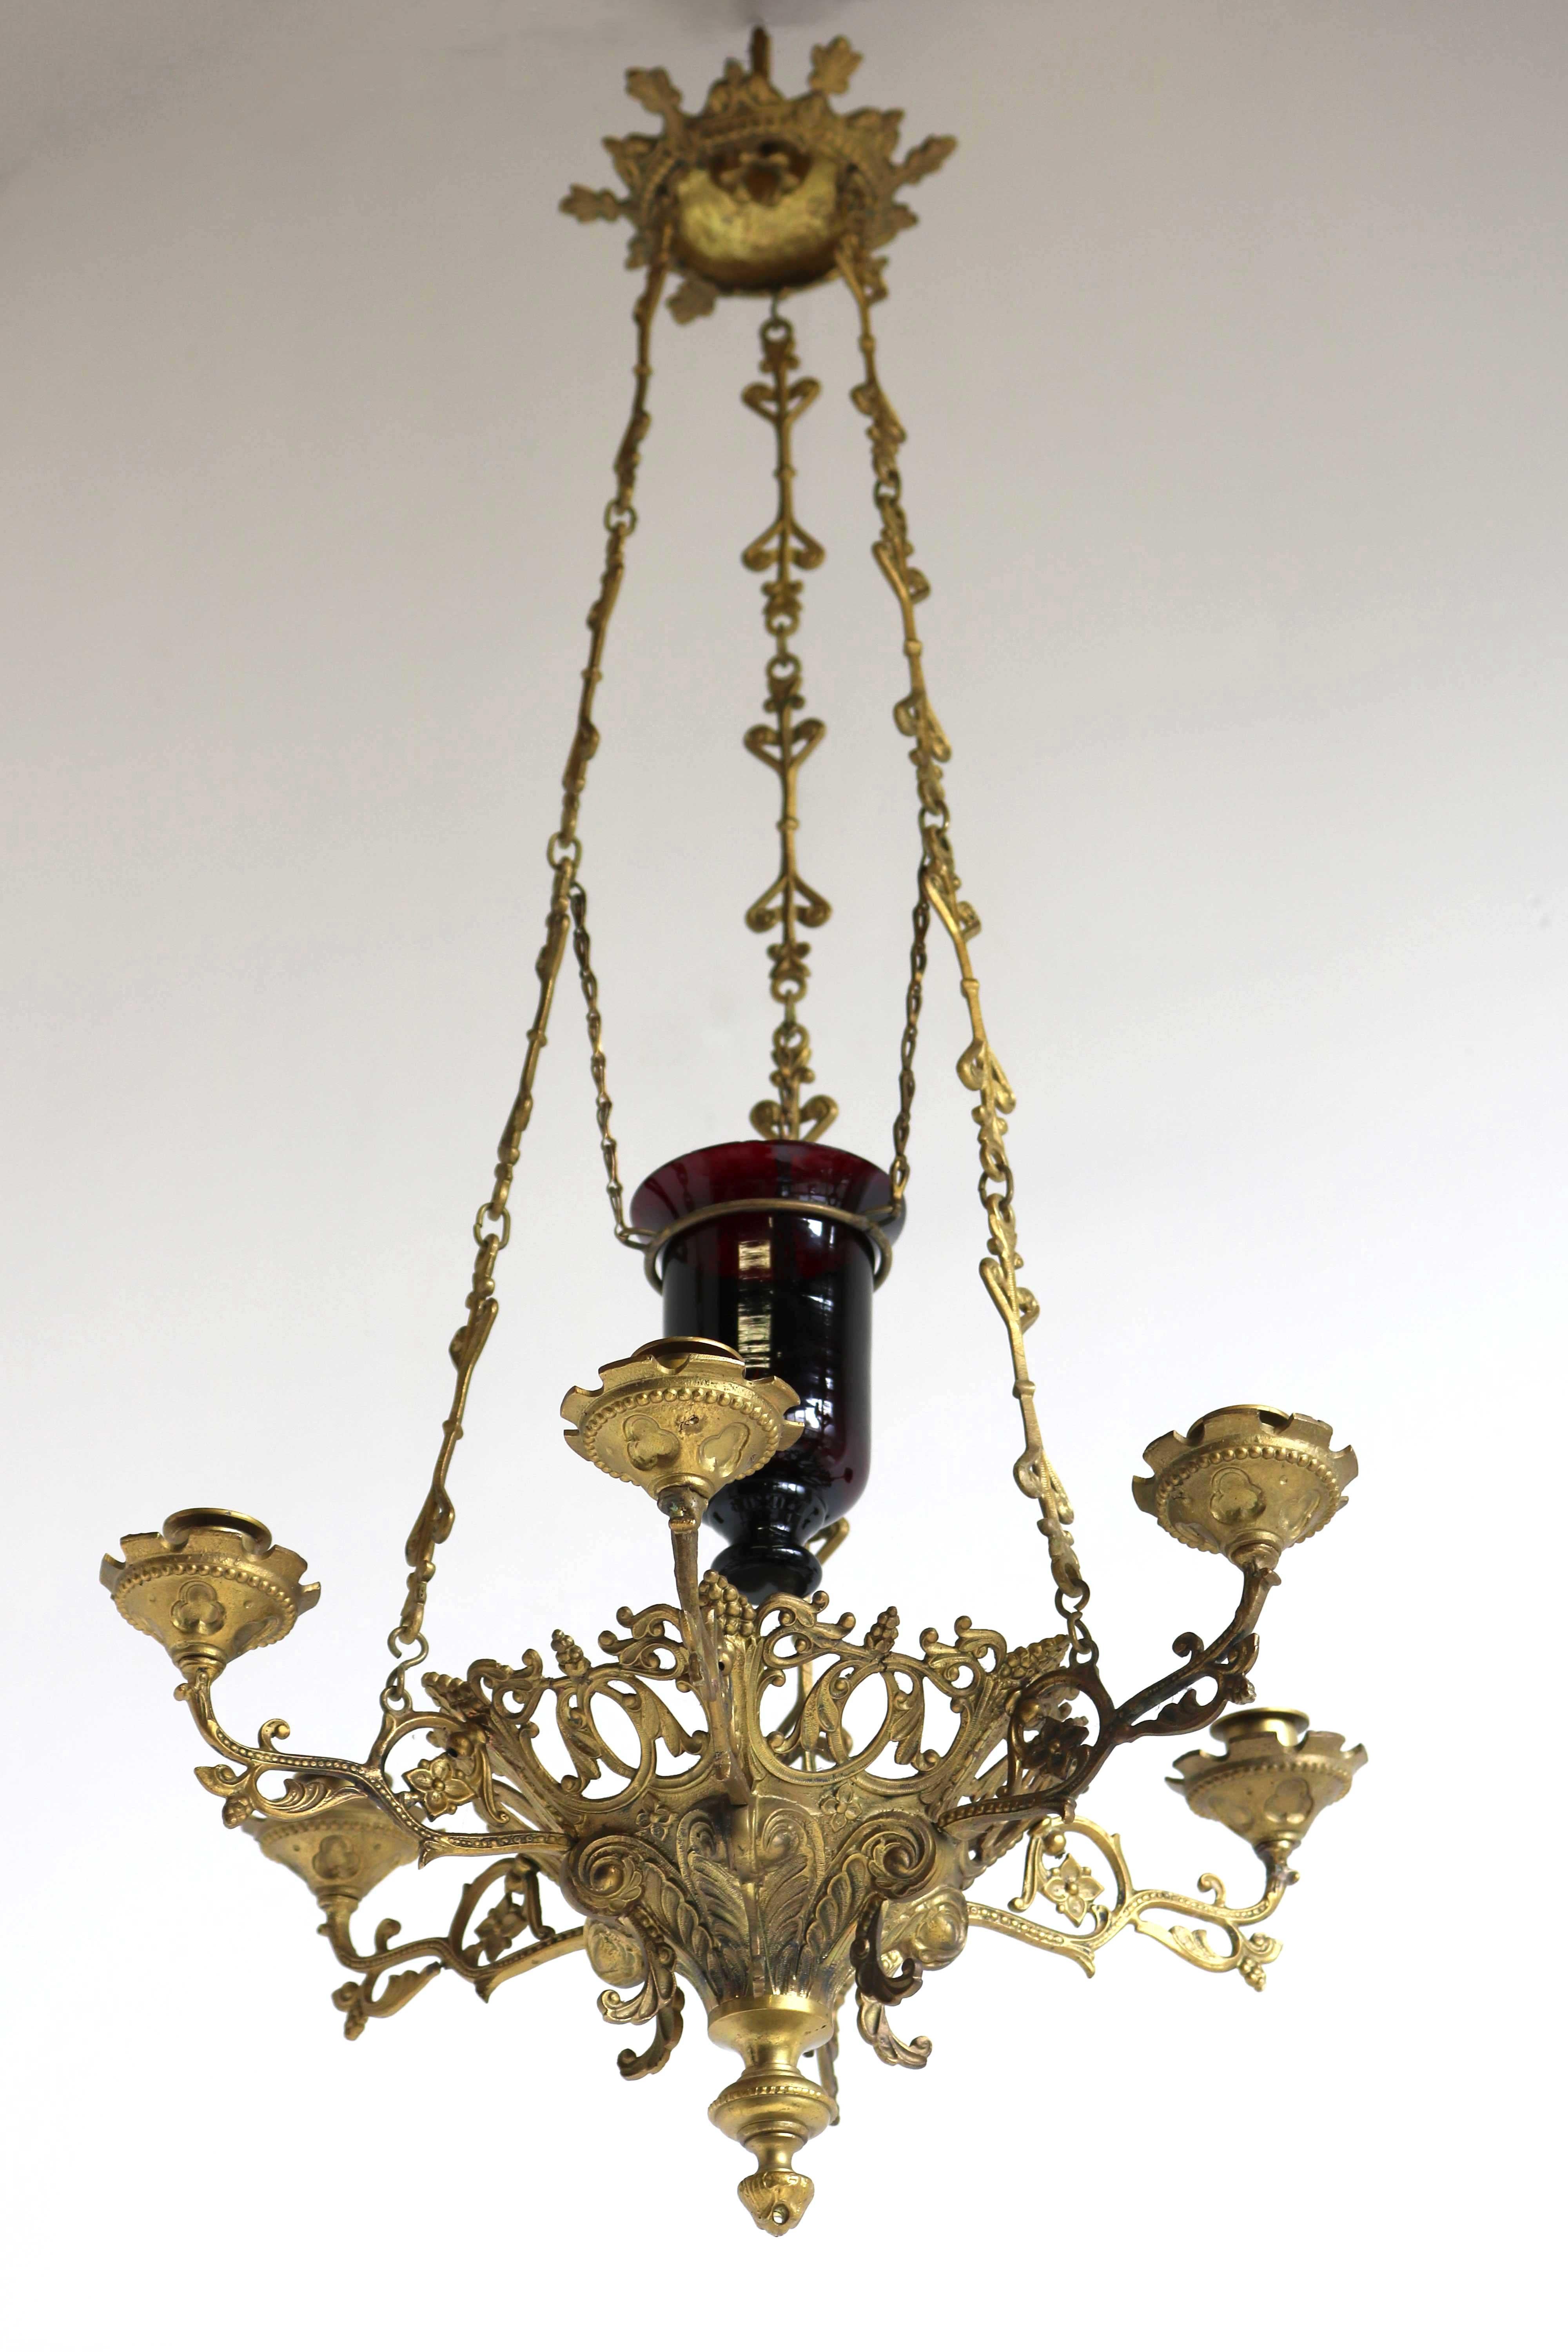 God's Lamp/Church Chandelier brass early 20th century Sanctuary lamp Art Nouveau style

Beautiful authentic brass Church chandelier/God's lamp in graceful Art Nouveau style, made in the early 20th century. Gorgeous body with floral details